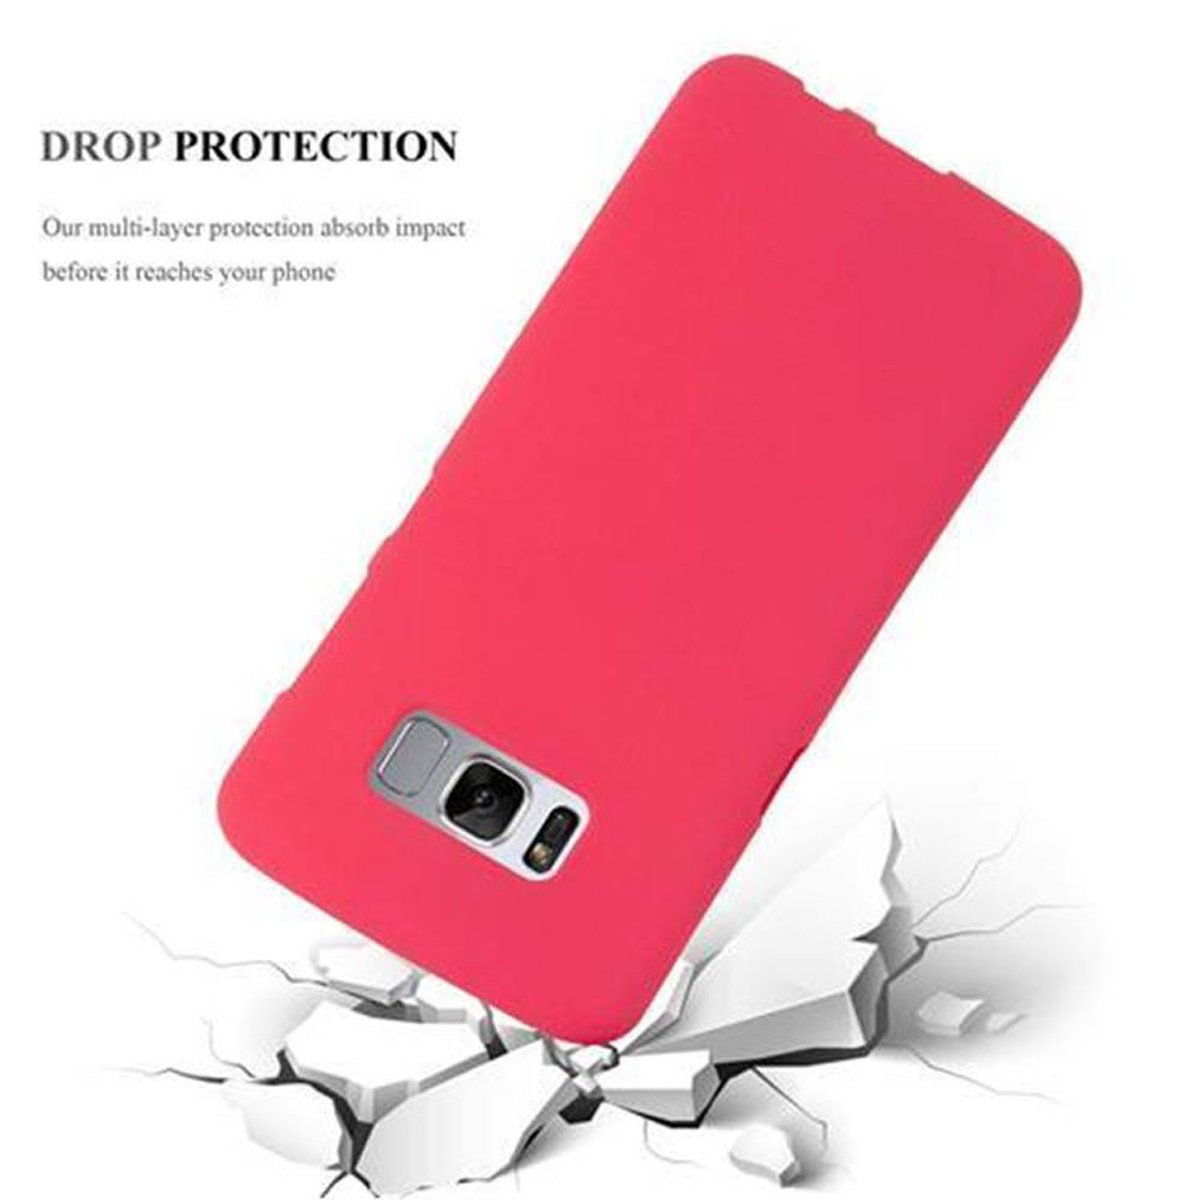 Schutzhülle, FROST Backcover, ROT Galaxy PLUS, TPU Frosted CADORABO Samsung, S8